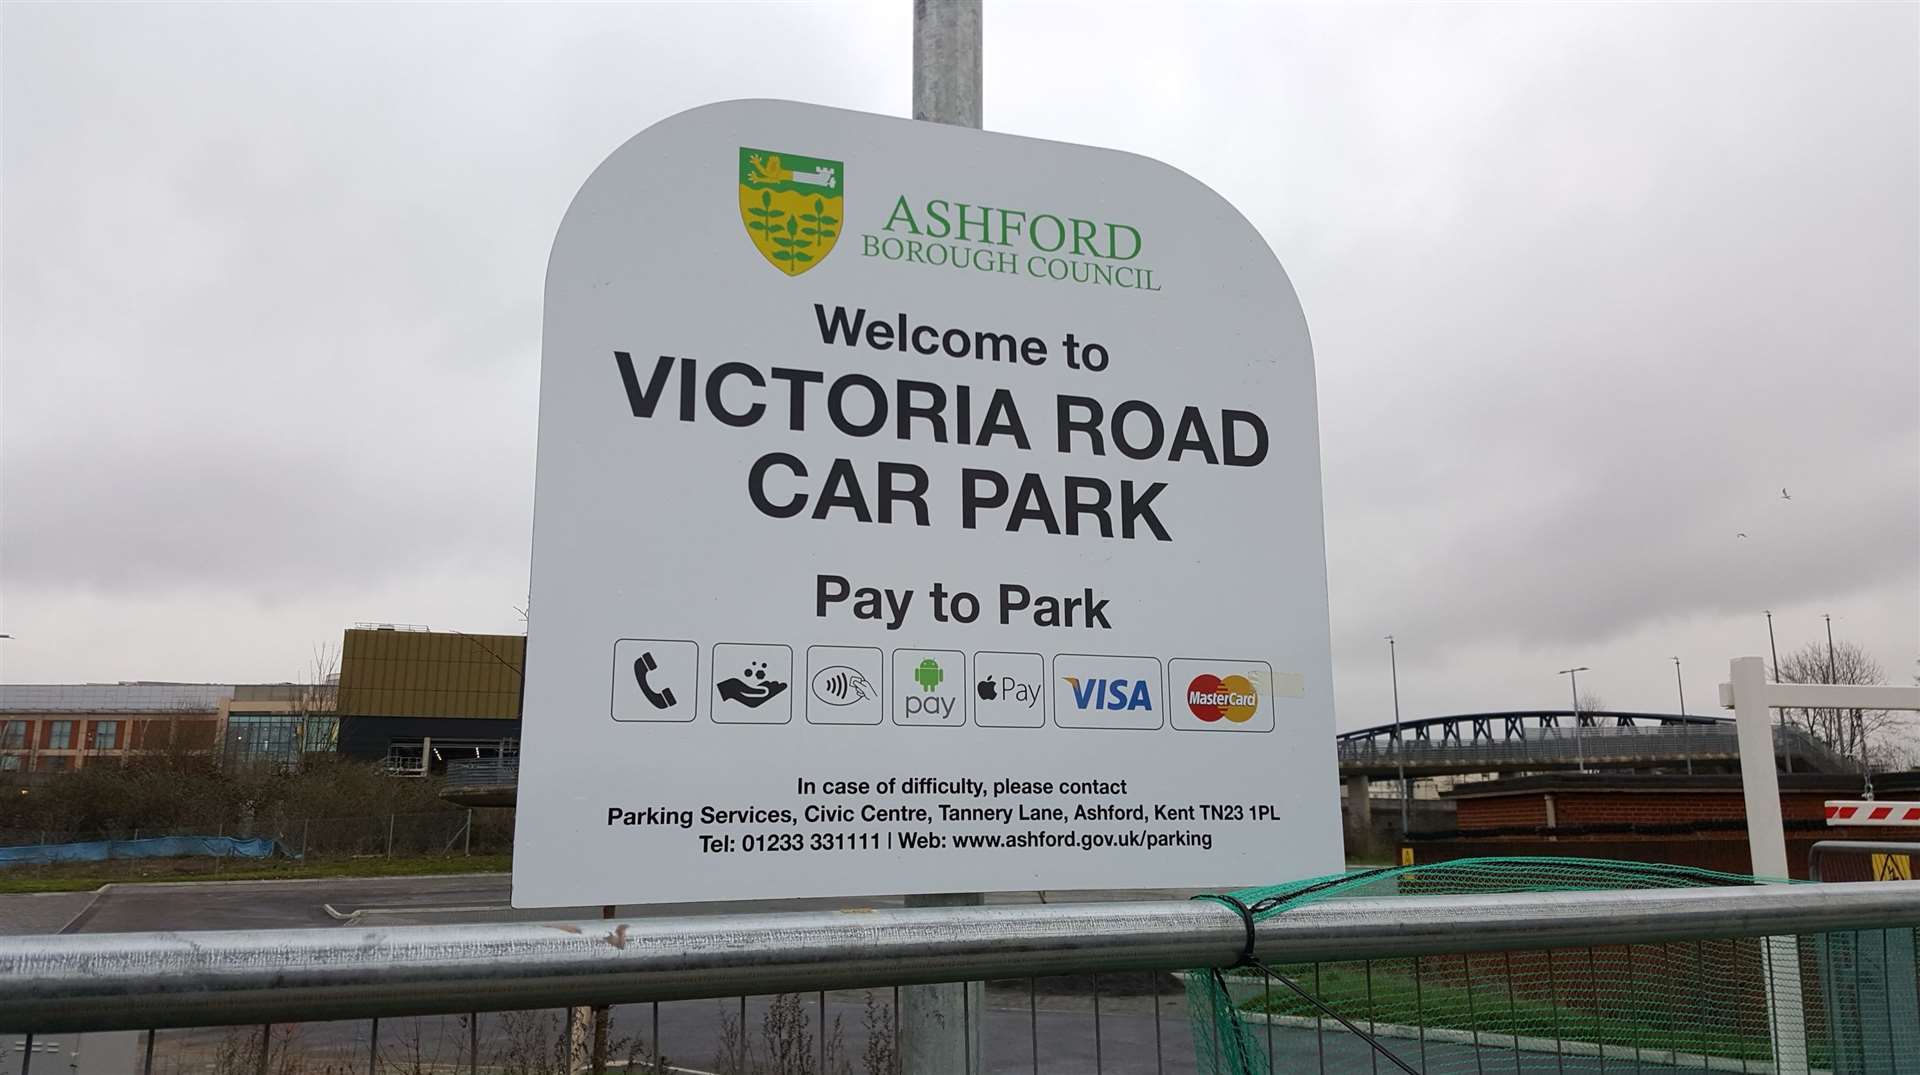 The Victoria Road Car Park in Ashford will be the site of a coronavirus test centre